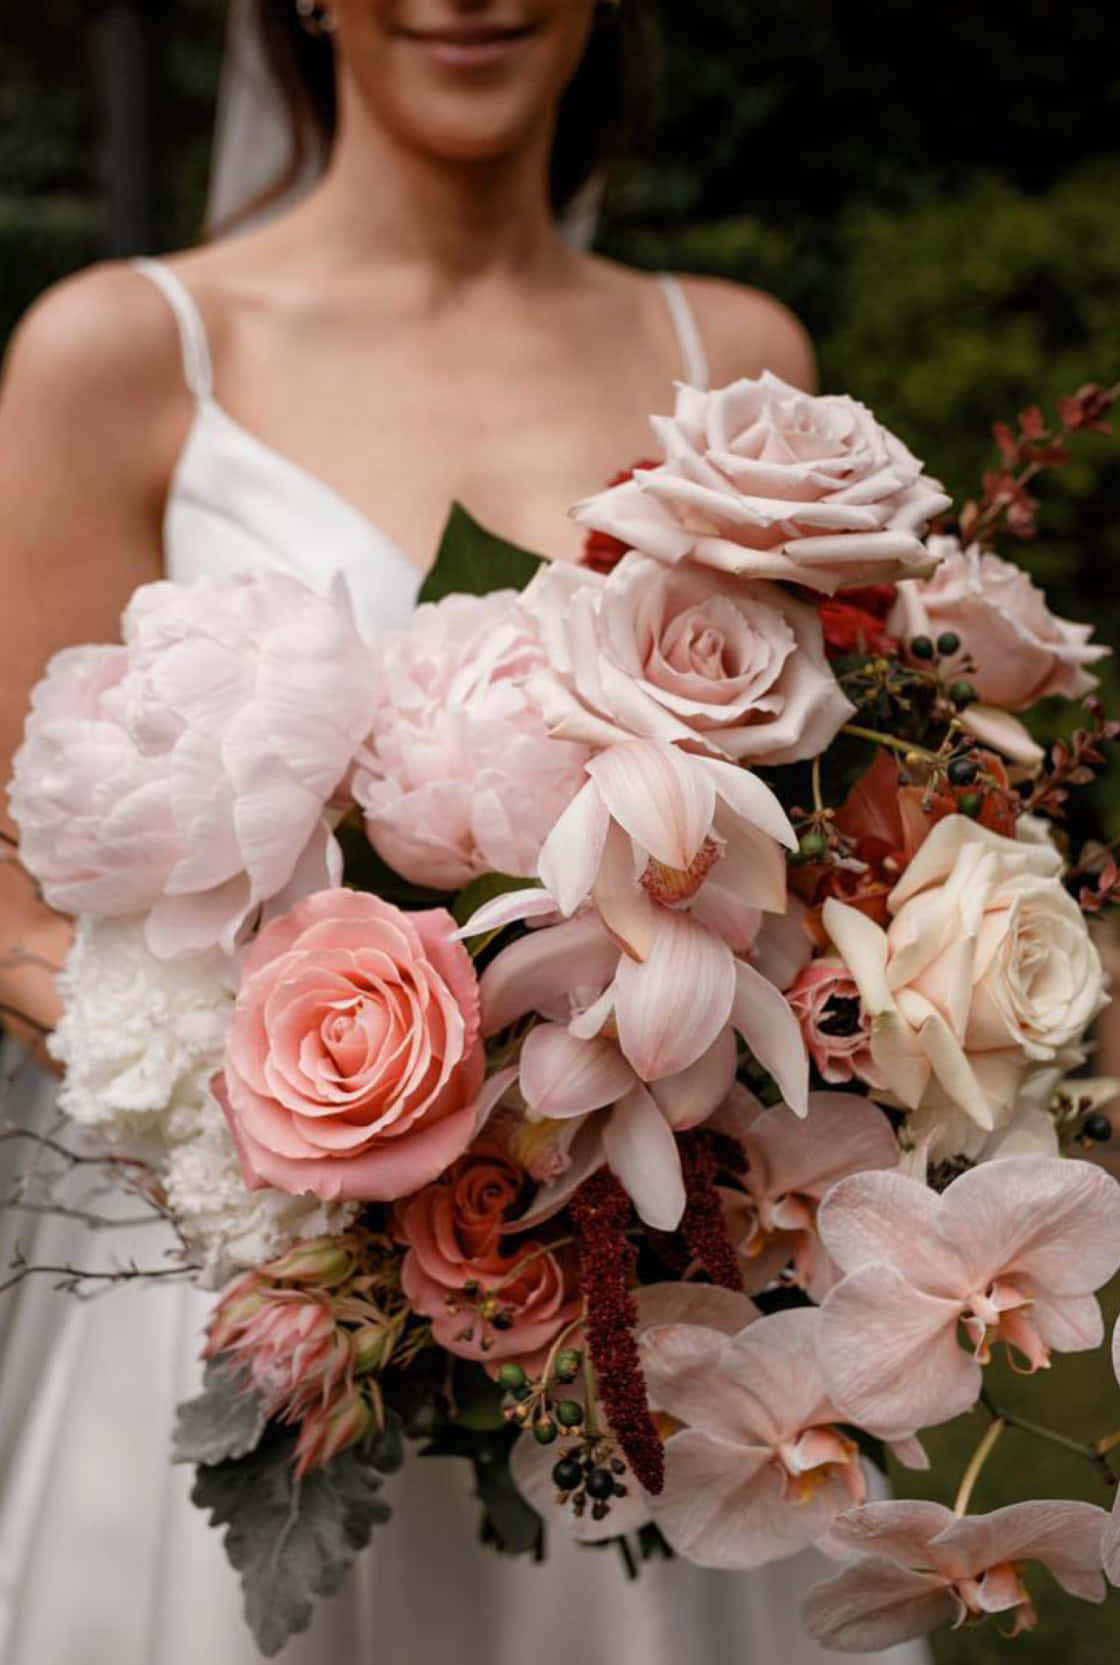 A Bride Holding A Pink And White Wedding Bouquet